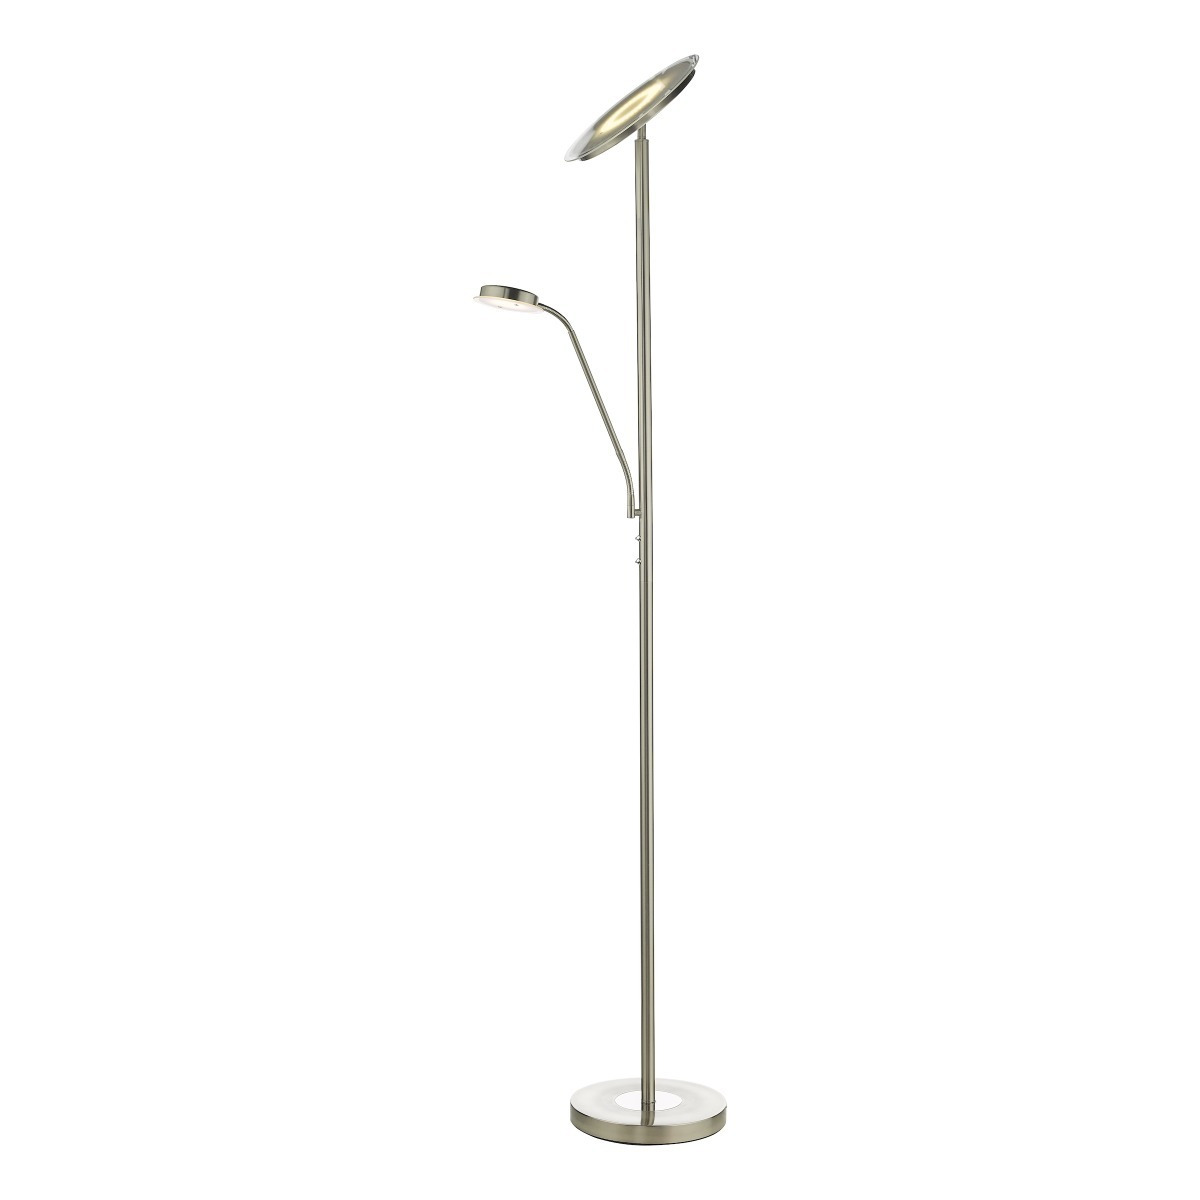 Dar Lighting Shelby LED Mother And Child Floor Lamp In Satin Nickel Finish SHE4946